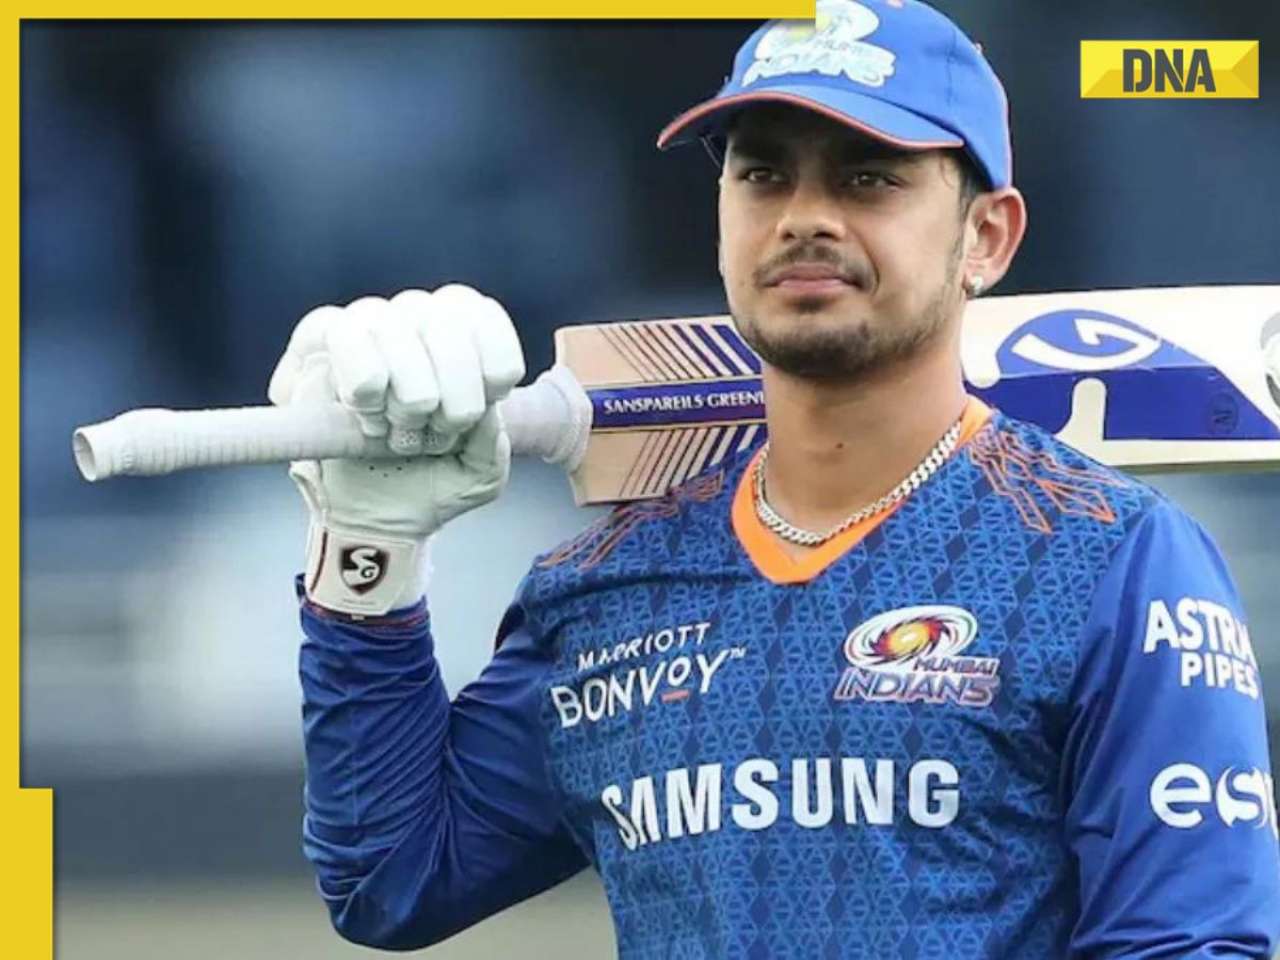 'Try and keep your ground...': Ishan Kishan expresses frustration over water bottle mess in message to fans